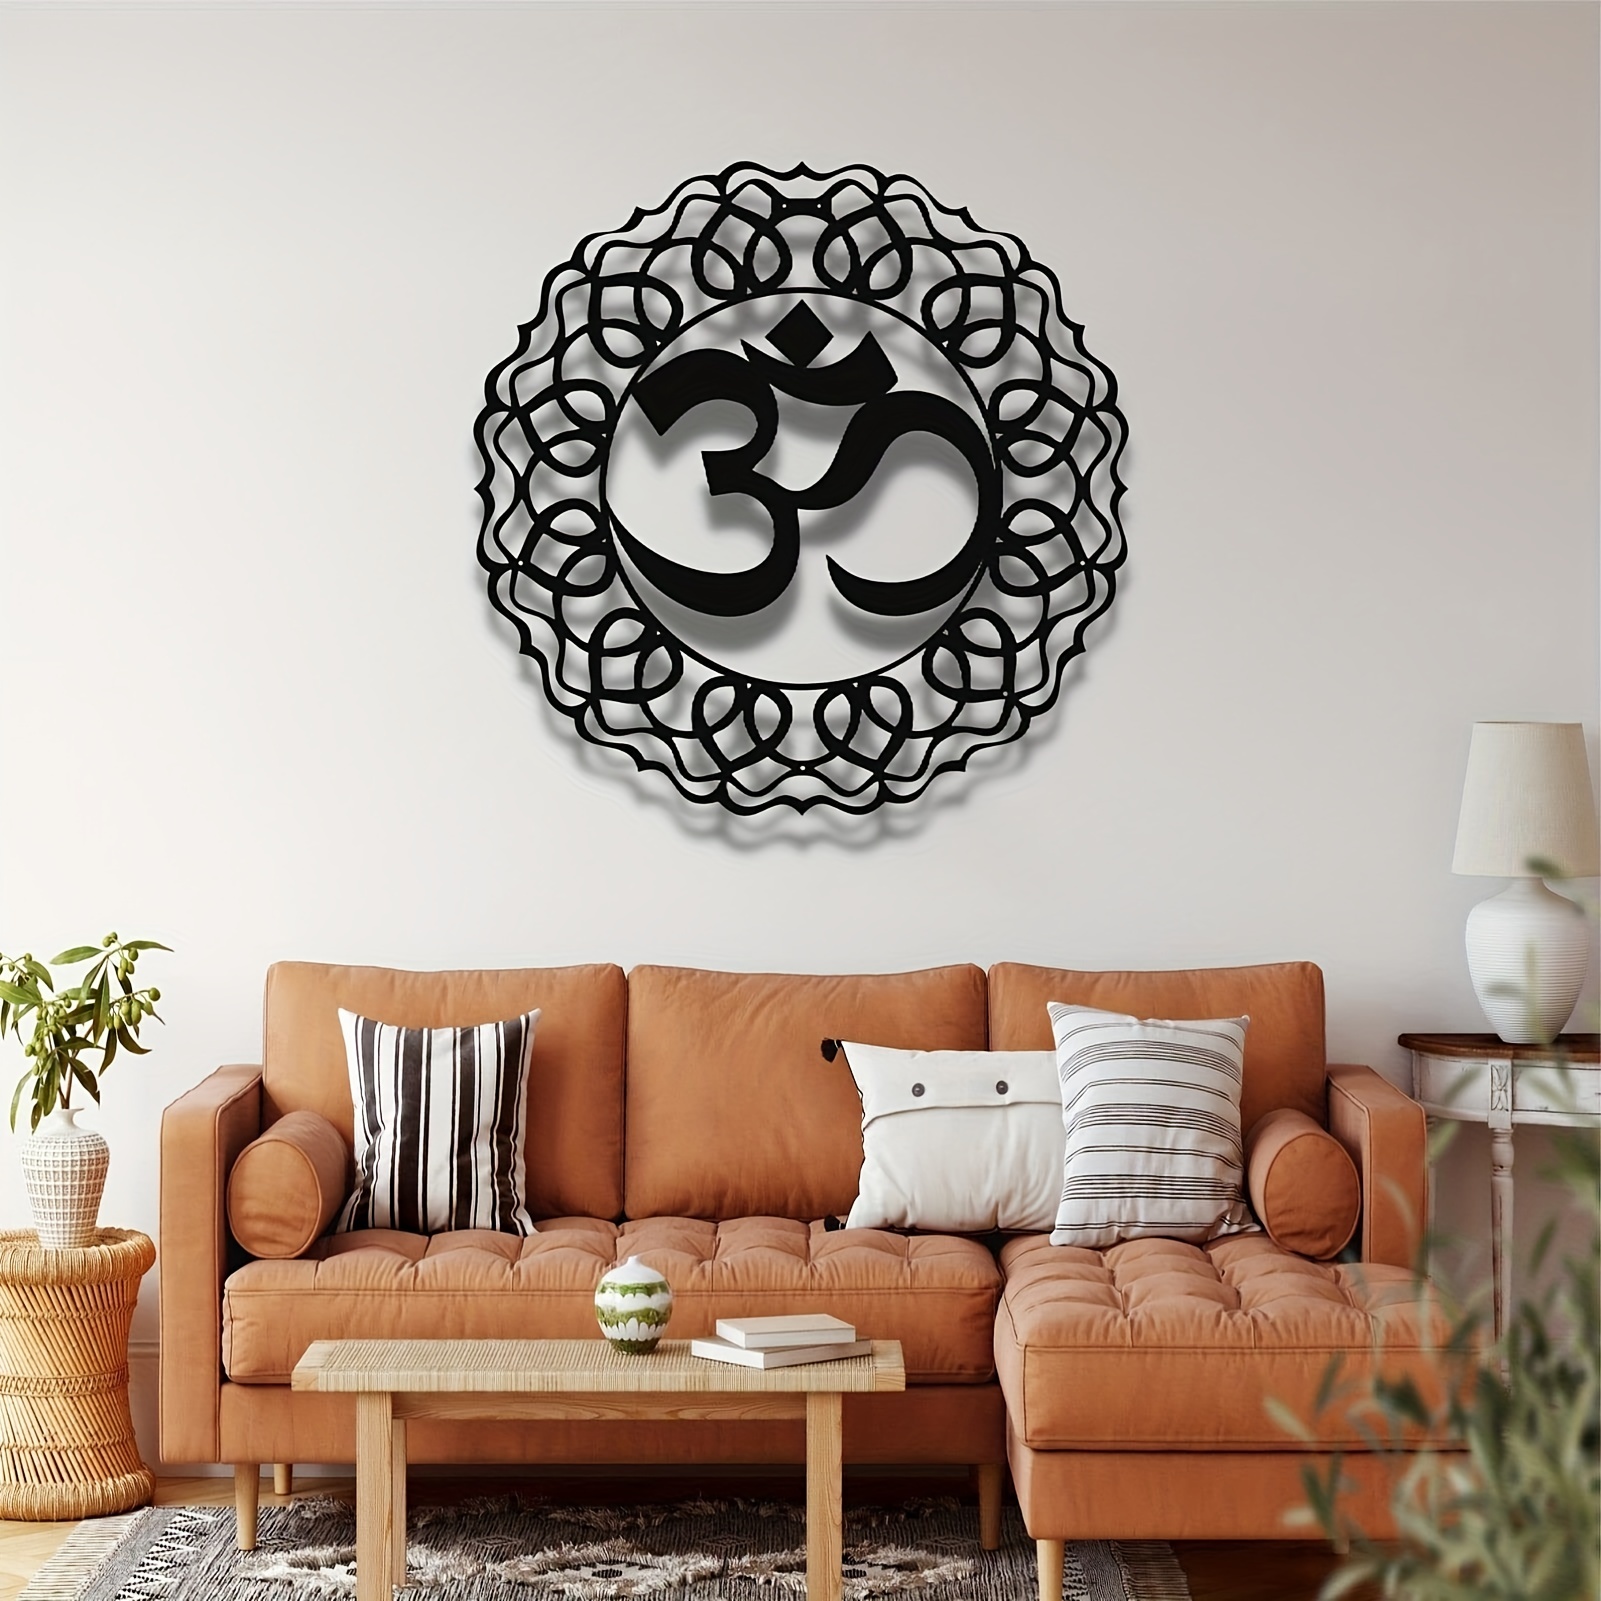 Metal Retro Style Wall Decor,, Round Metal Decor, Only Office, Bedroom,  Bar, Cafe, Restaurant, Hotel, Store Shop Wall Decor, Living Room Nursery  Bedroom Decor Sticker Mural, Living Room Office Dining Room Lobby